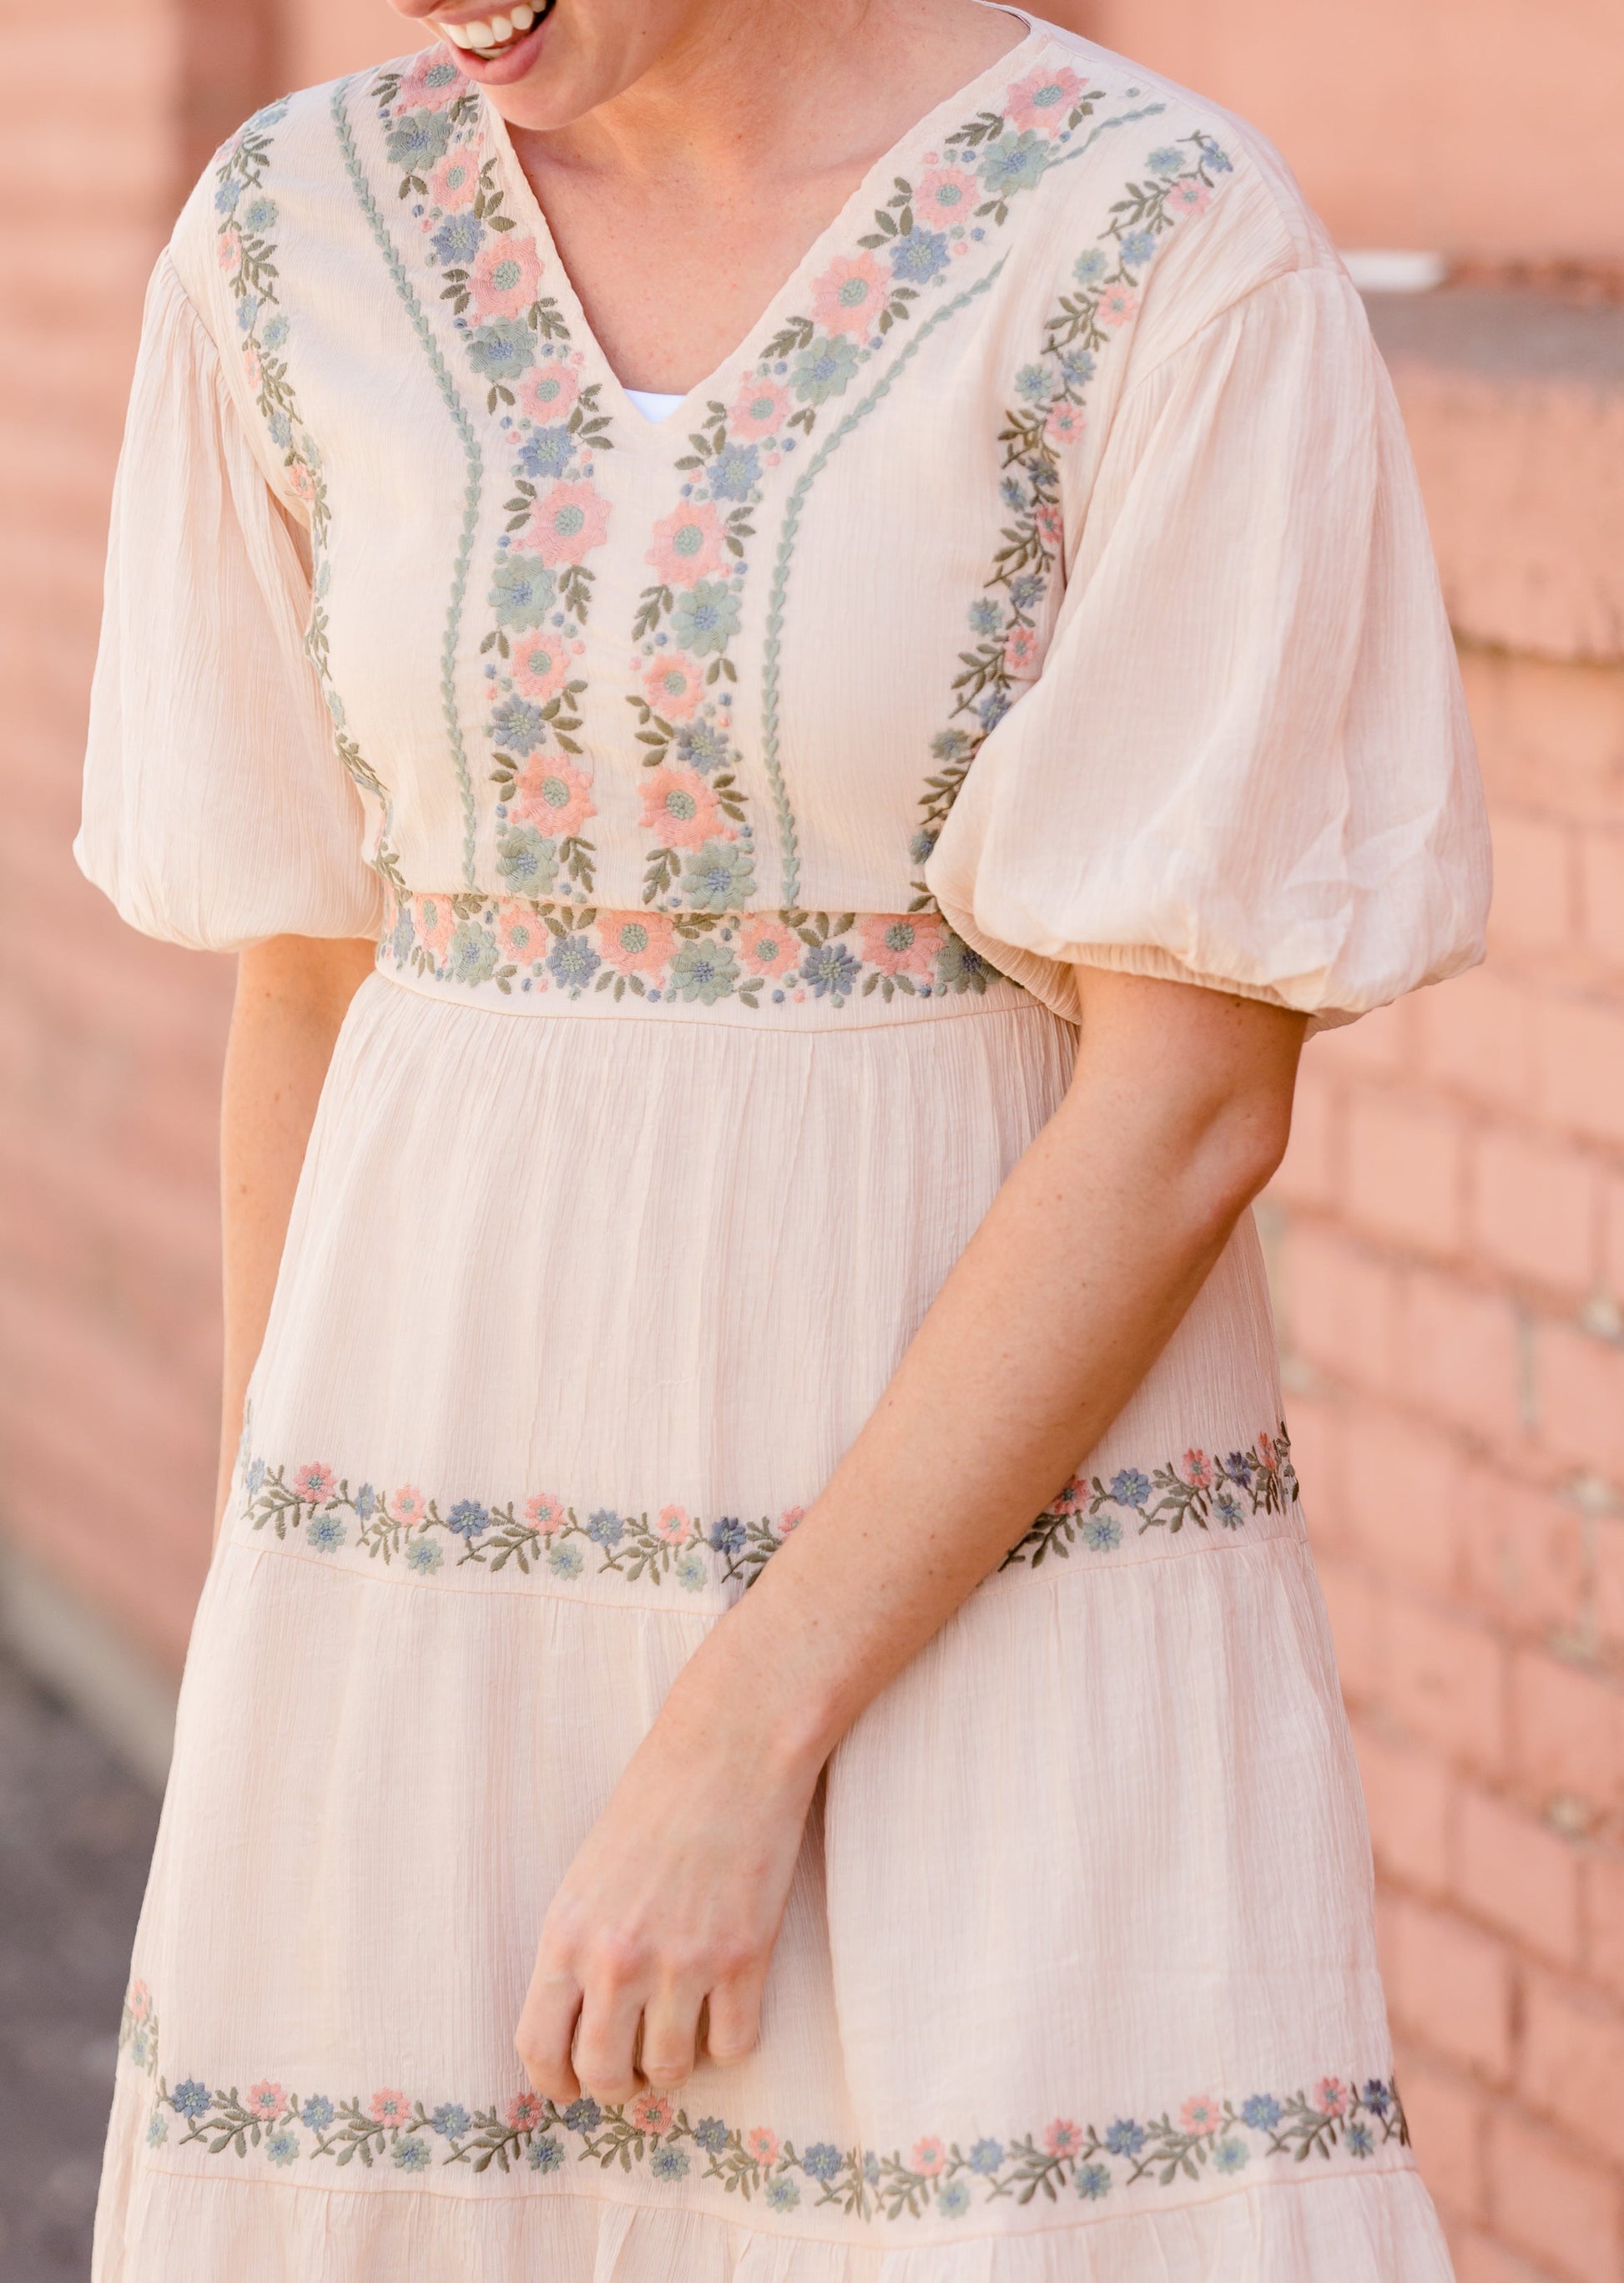 Blush Ethereal Embroidered Midi Dress - FINAL SALE Dresses